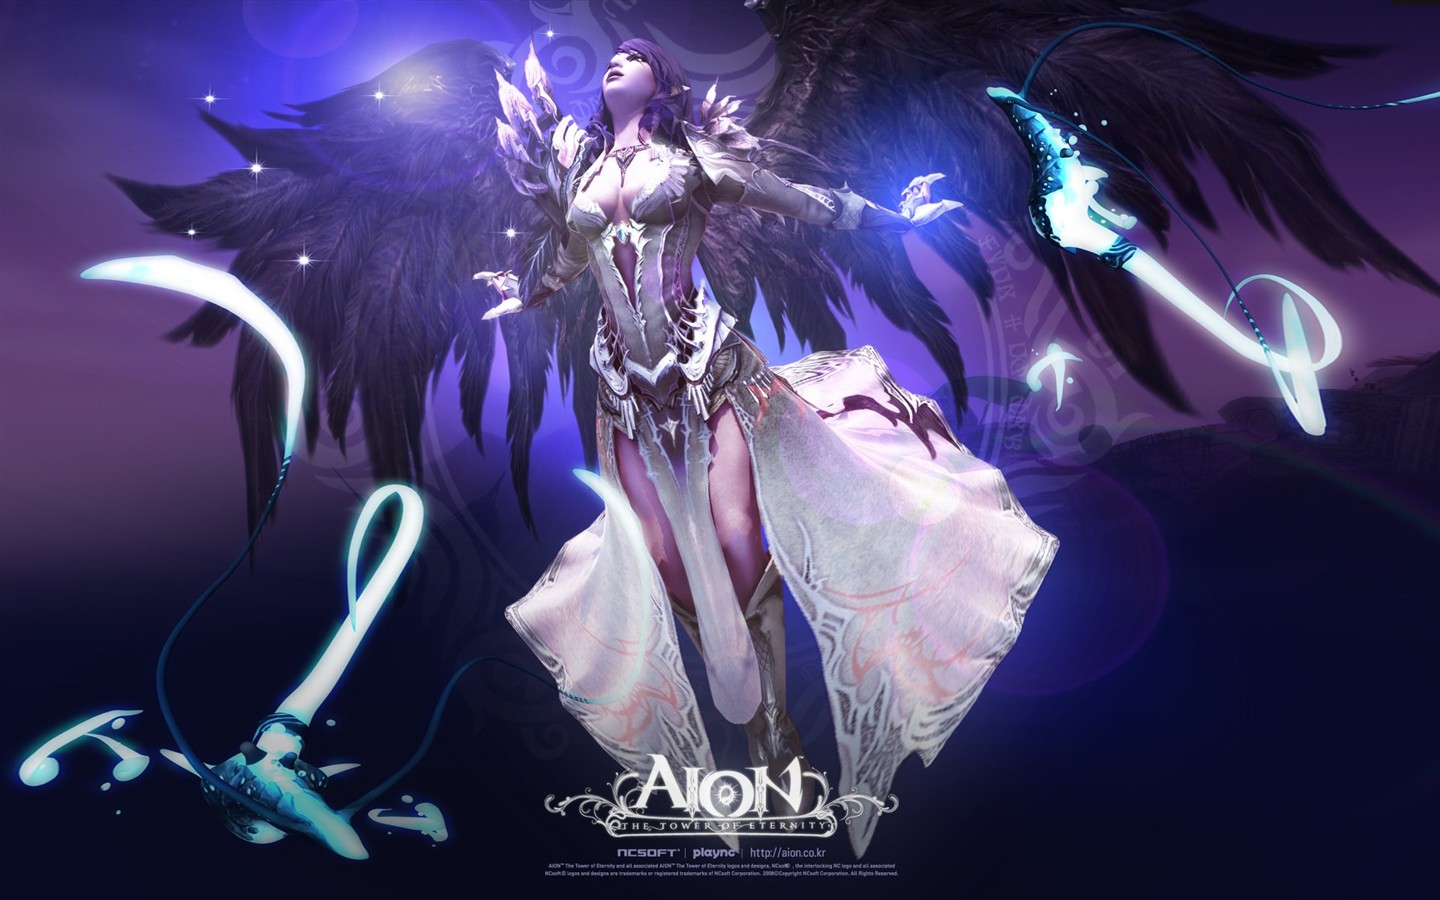 Aion modeling HD gaming wallpapers #2 - 1440x900